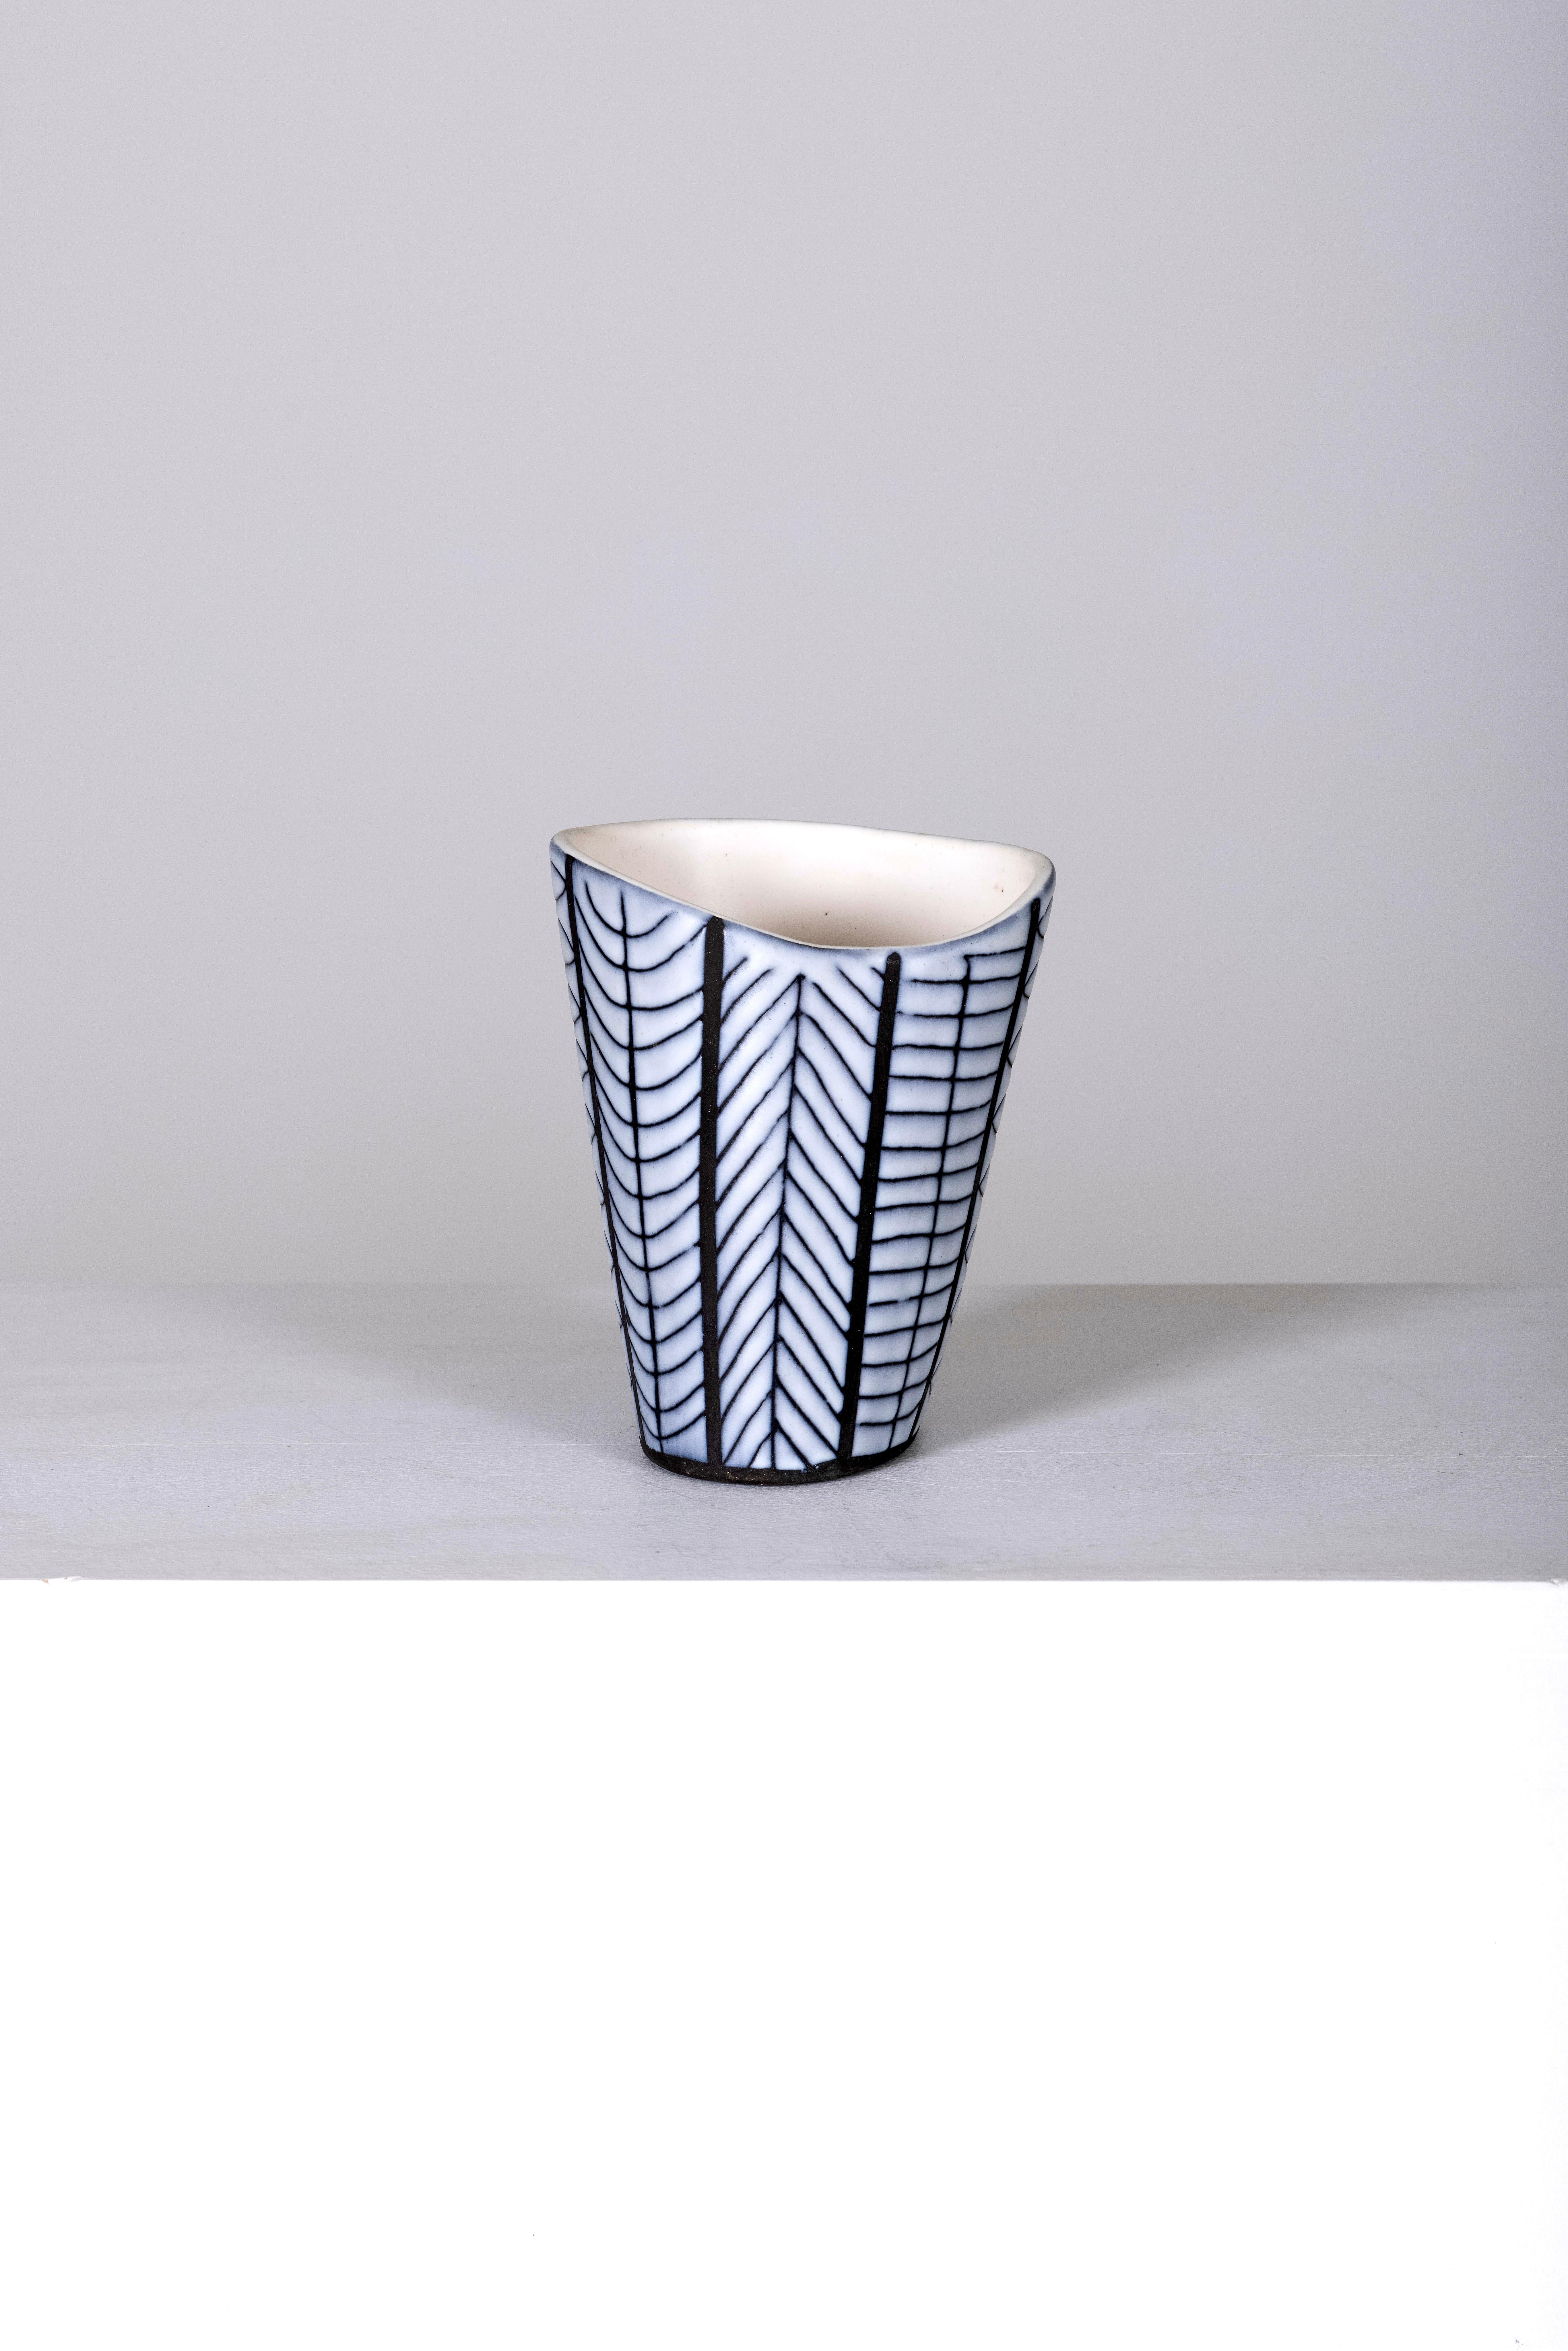 Enameled ceramic vase by designer Roger Capron (1922-2006), from the 1960s. Black and white reserve decoration. The vase is signed by the ceramist Capron on the underside. Very good condition.
LP1471